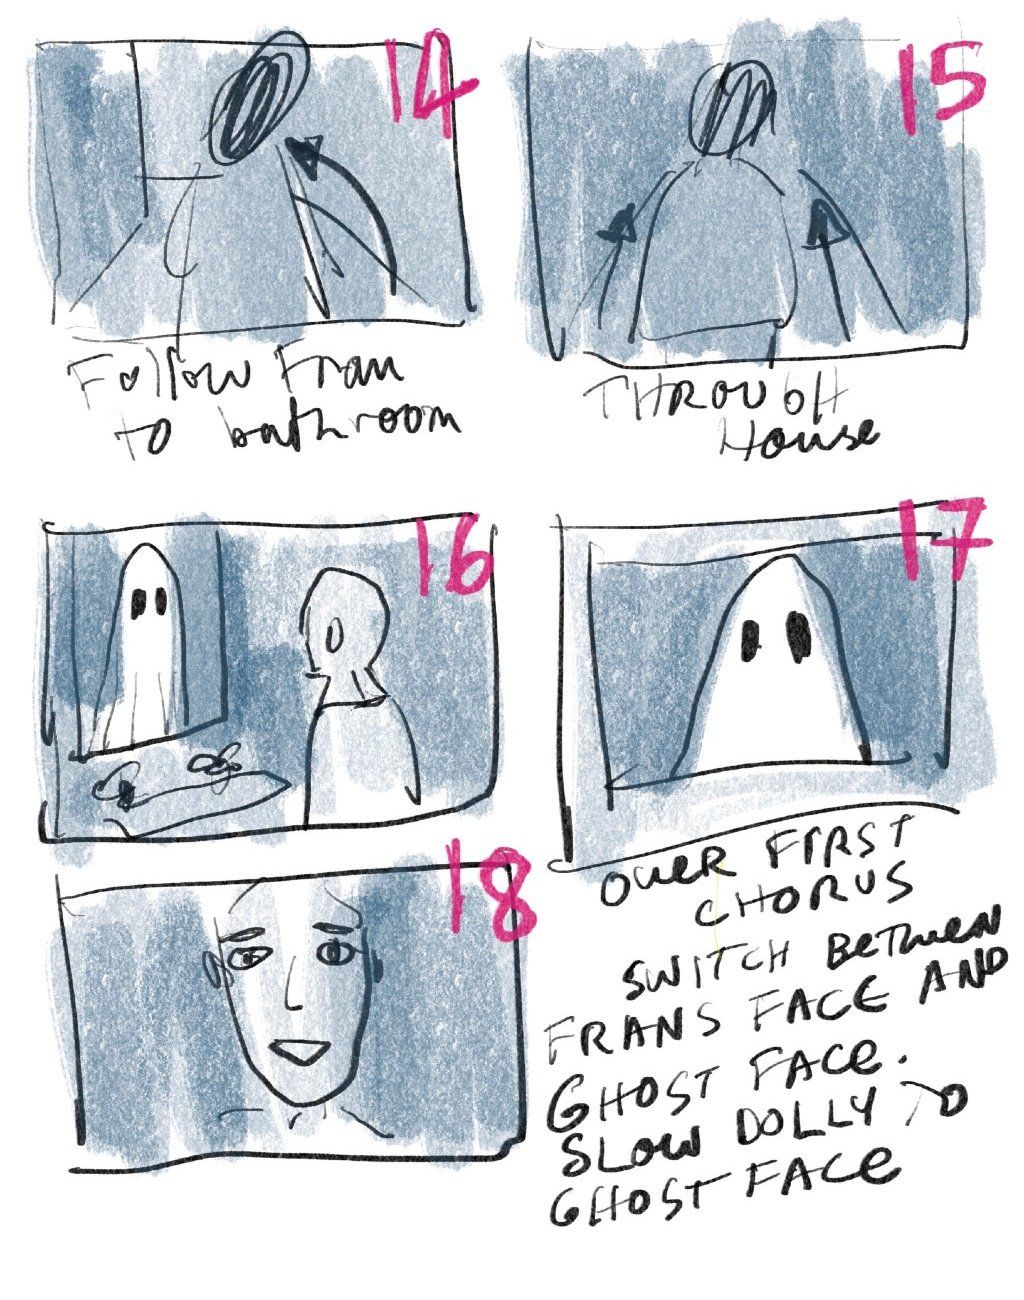 An early storyboard for the video